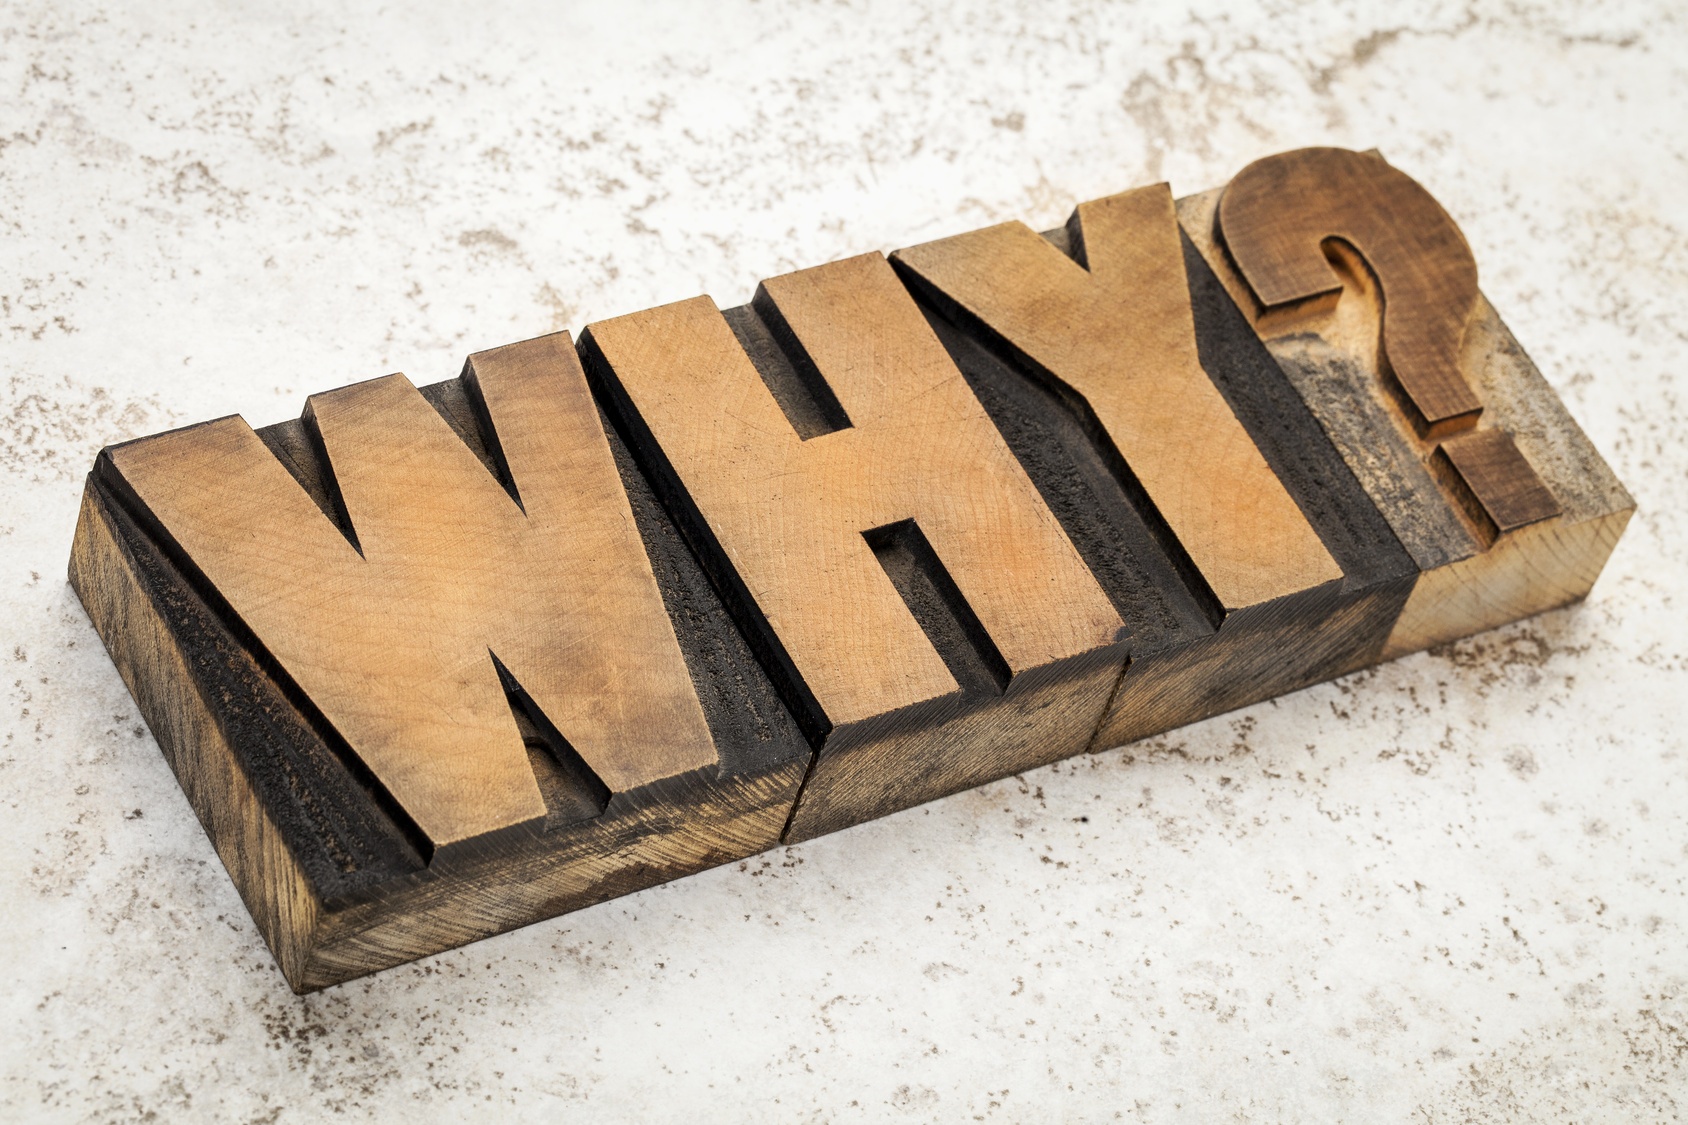 Improve Your Sales Behavior by Asking Why